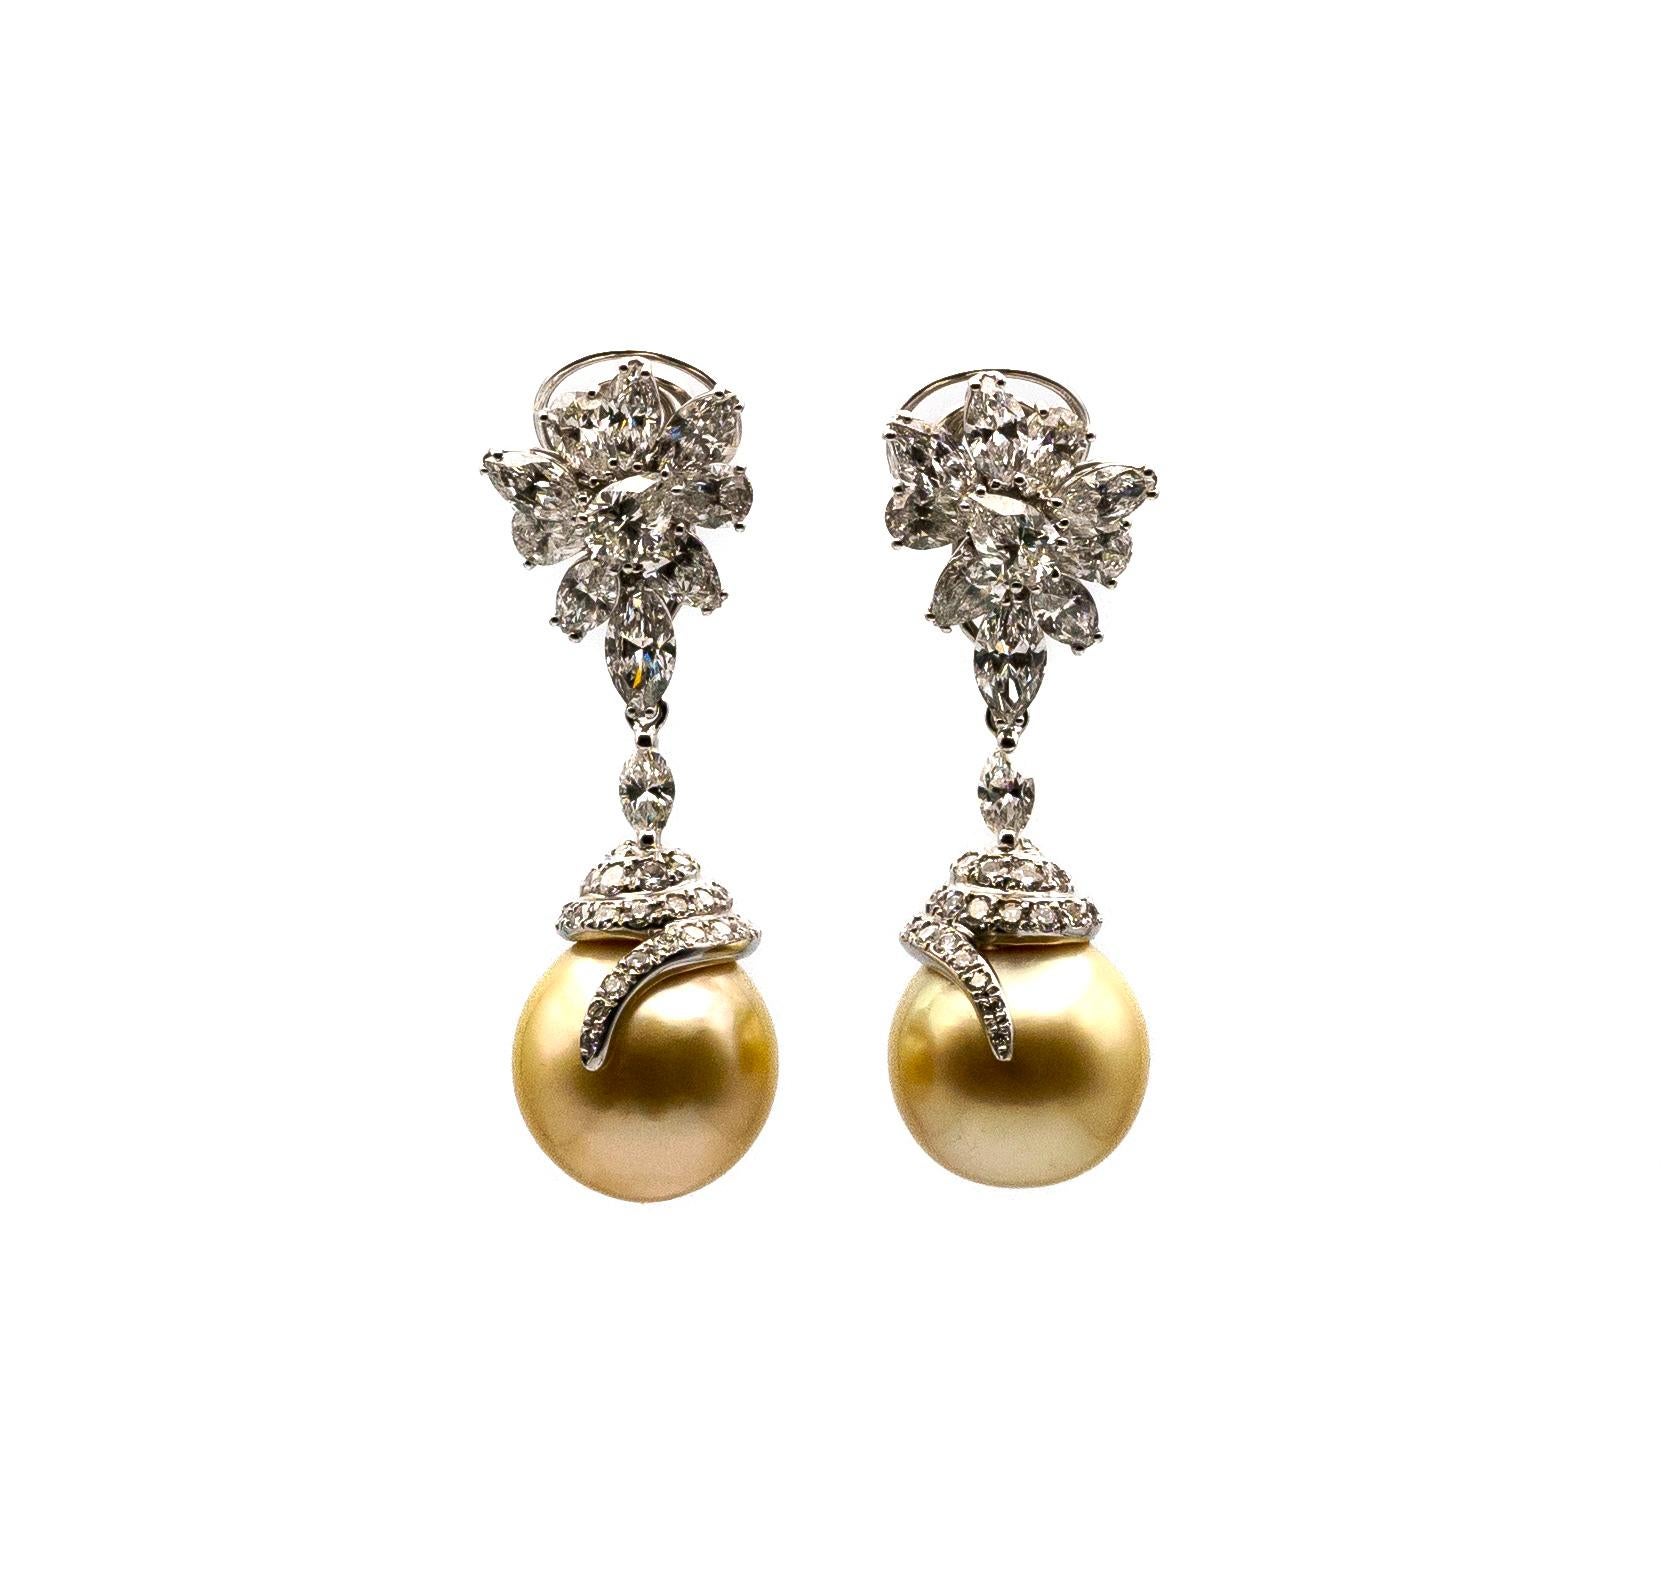 Women's Earrings in white gold set with diamonds, tourmaline, topaze, morganite, pearls For Sale